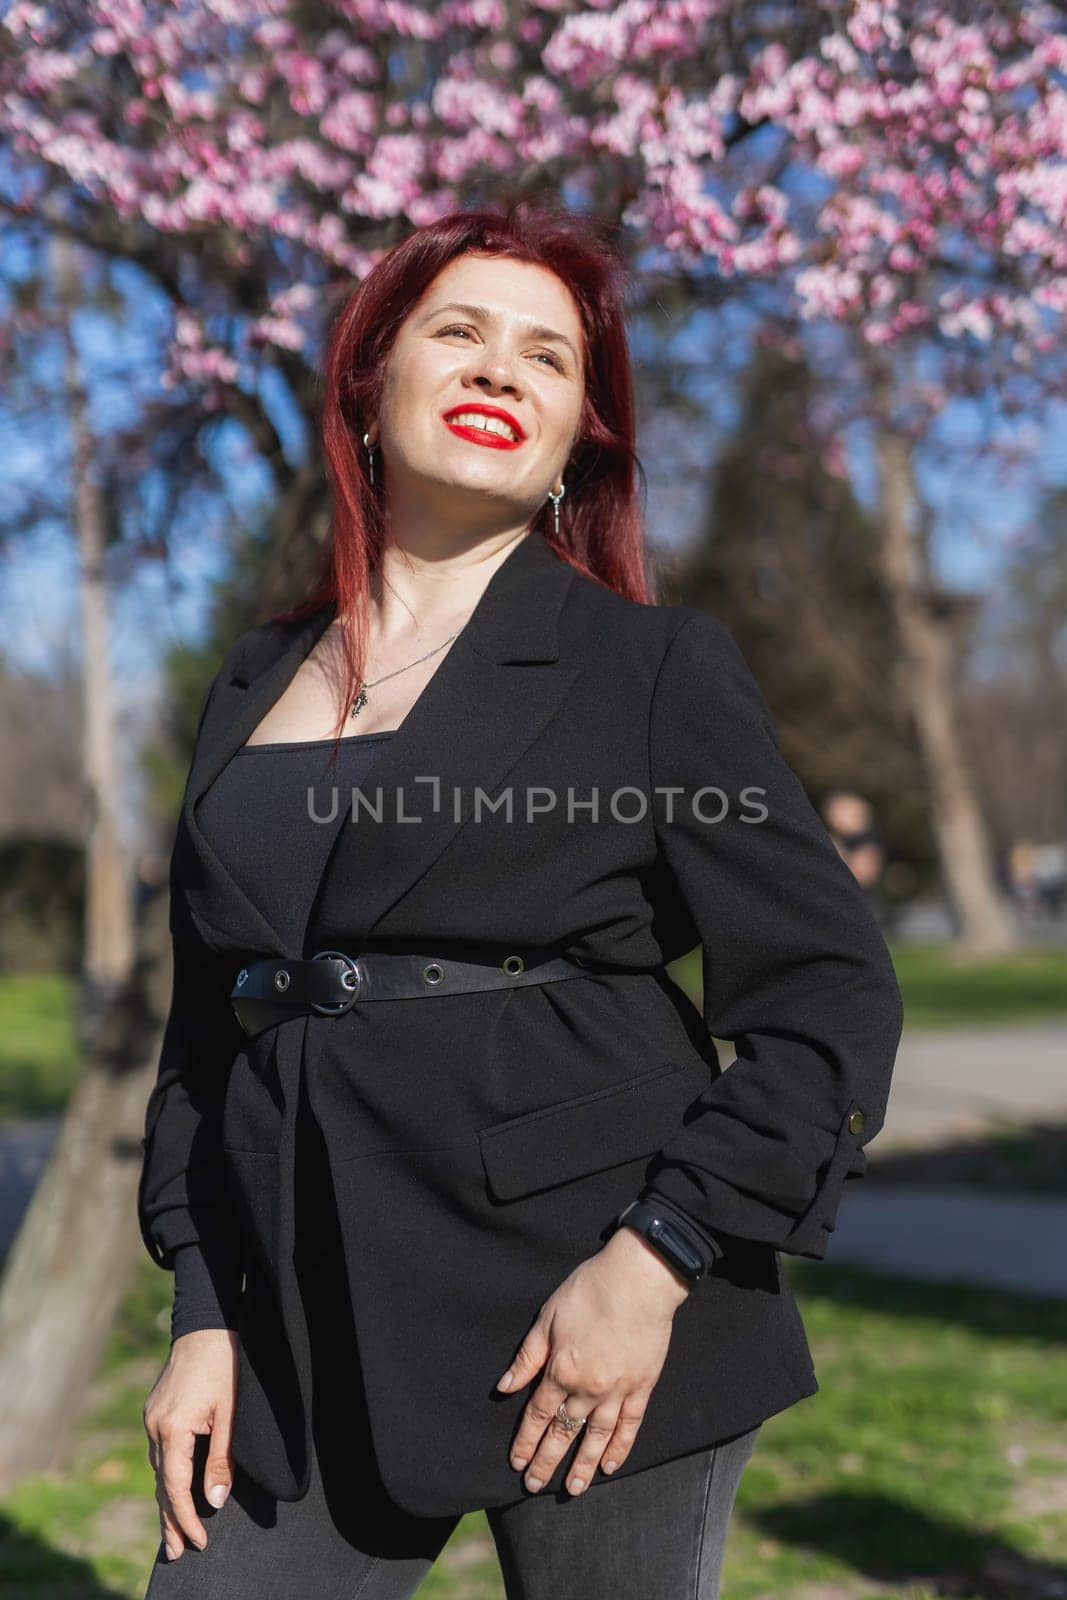 Fashion outdoor photo of beautiful woman with red curly hair in elegant suit posing in spring flowering park with blooming cherry tree. Copy space and empty place for advertising text by Satura86